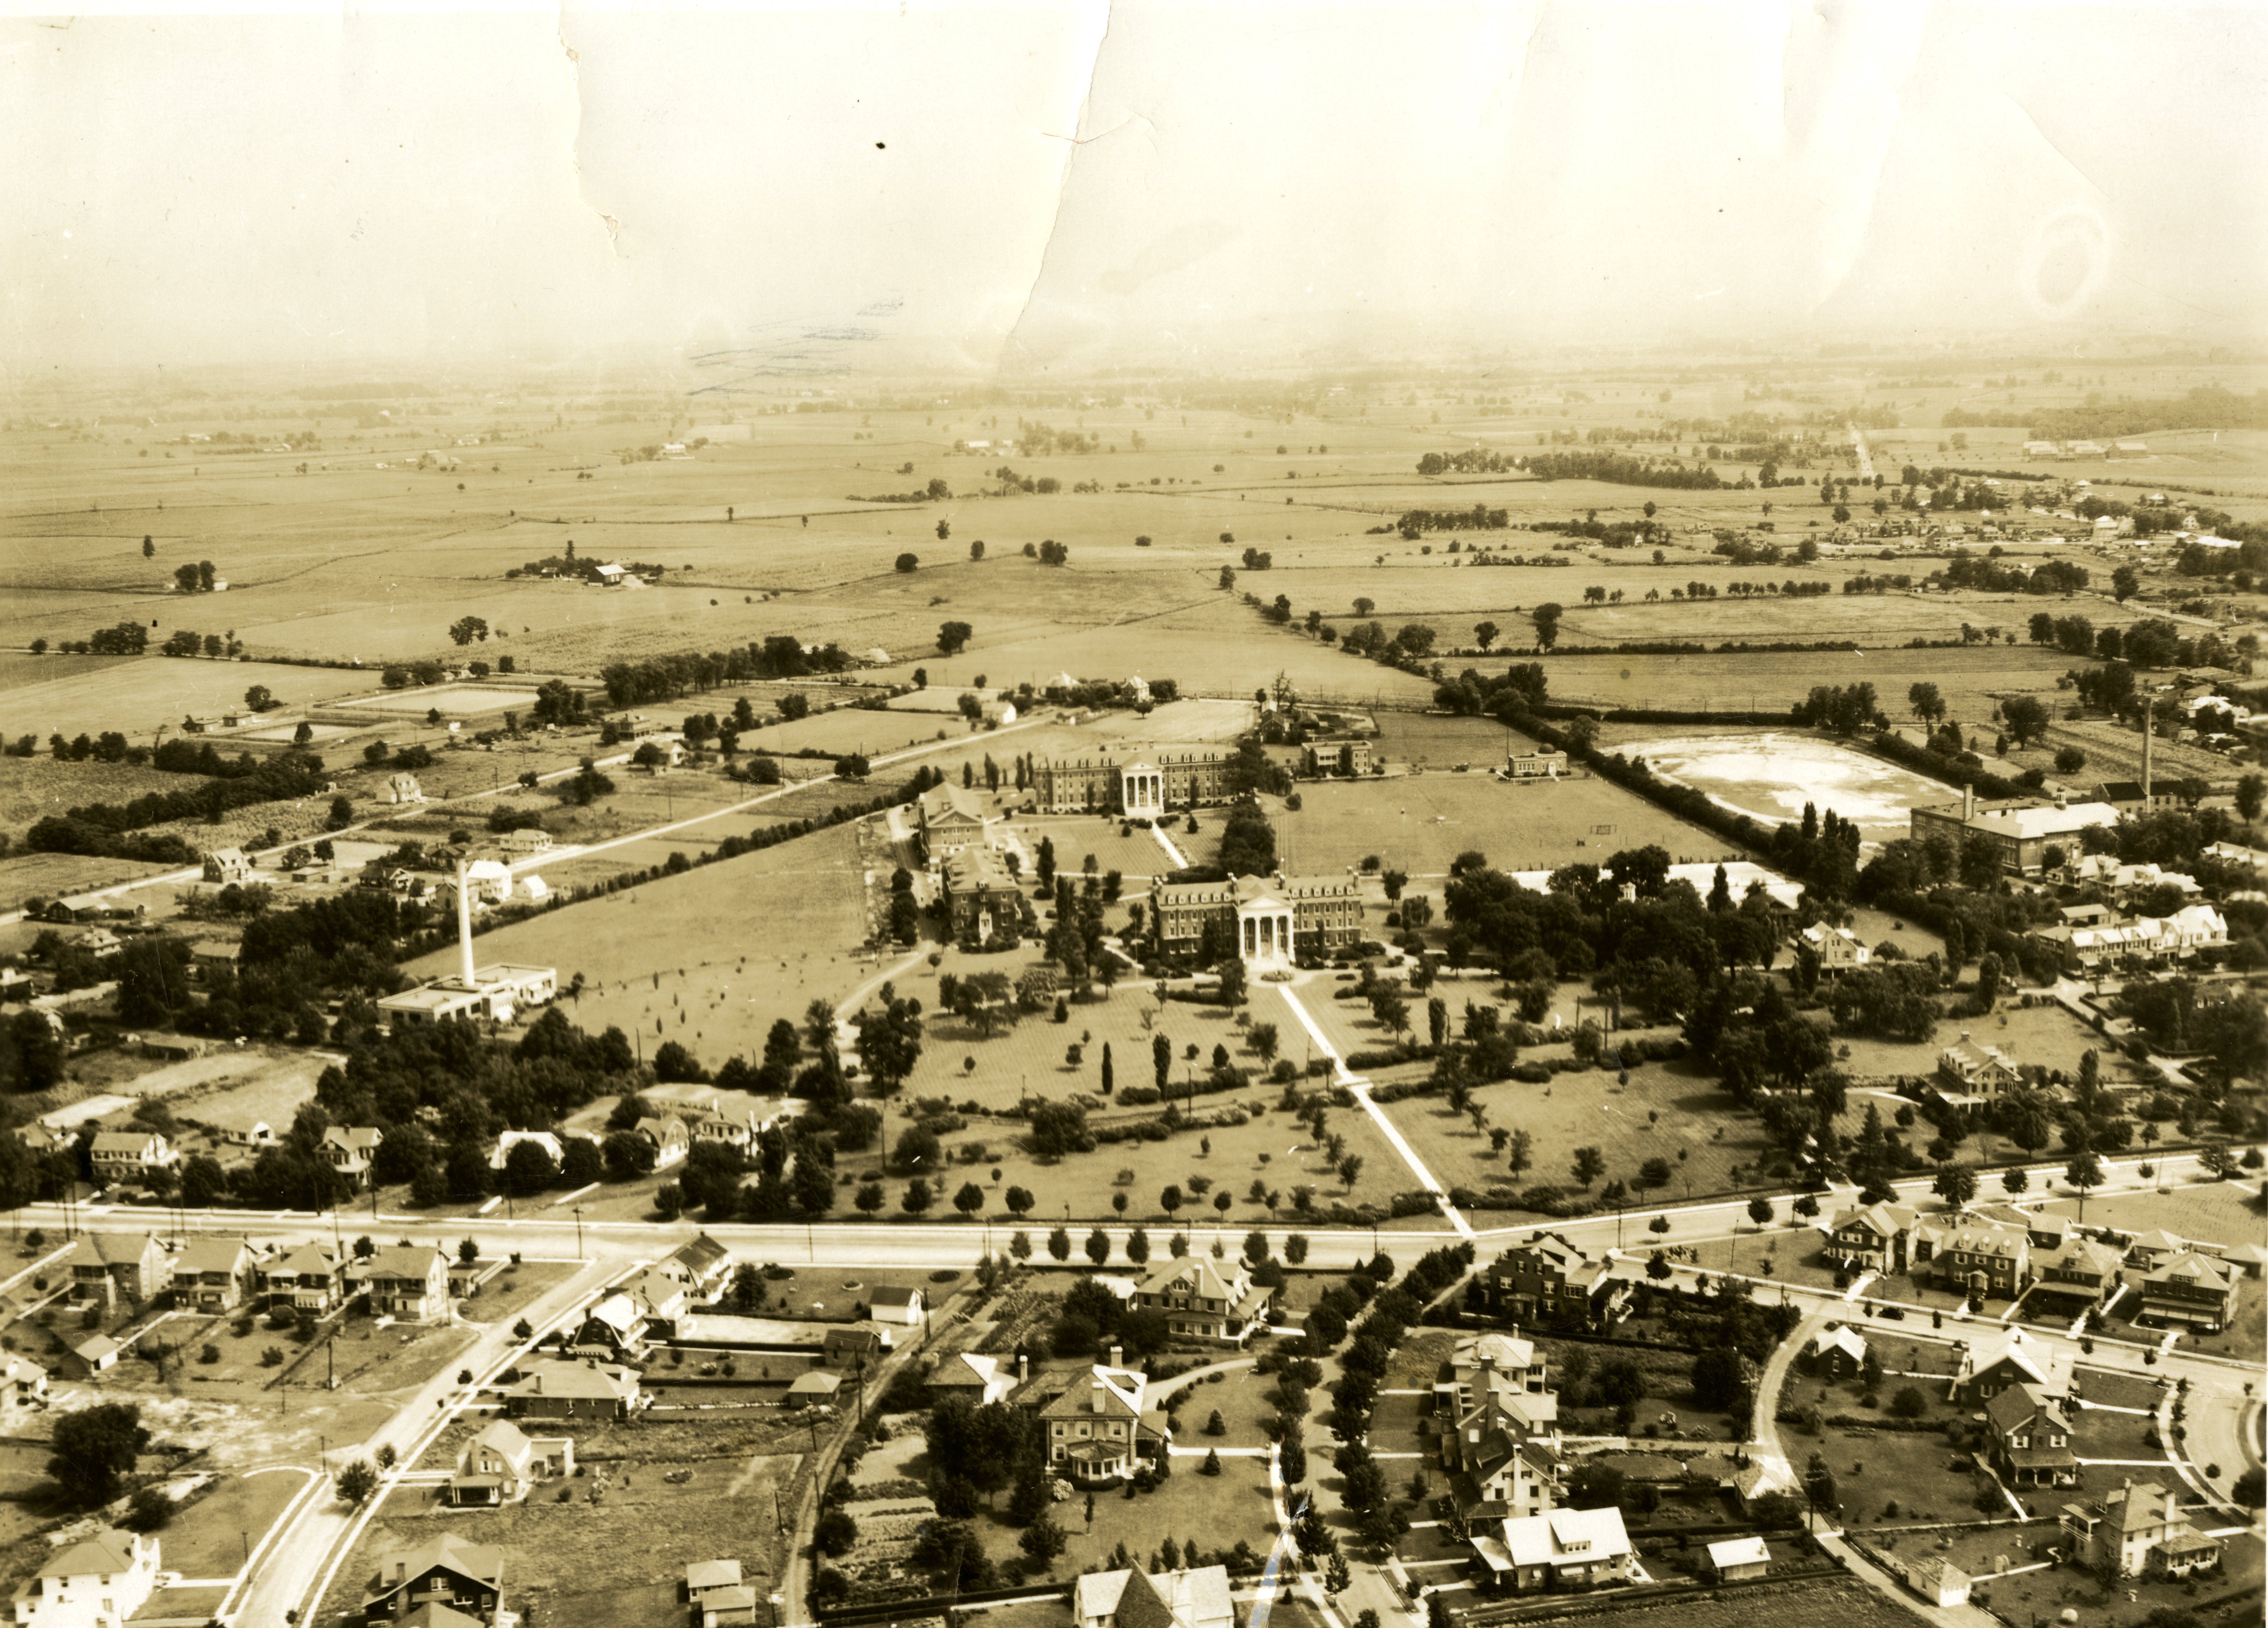 Hood College aerial photo from the archives